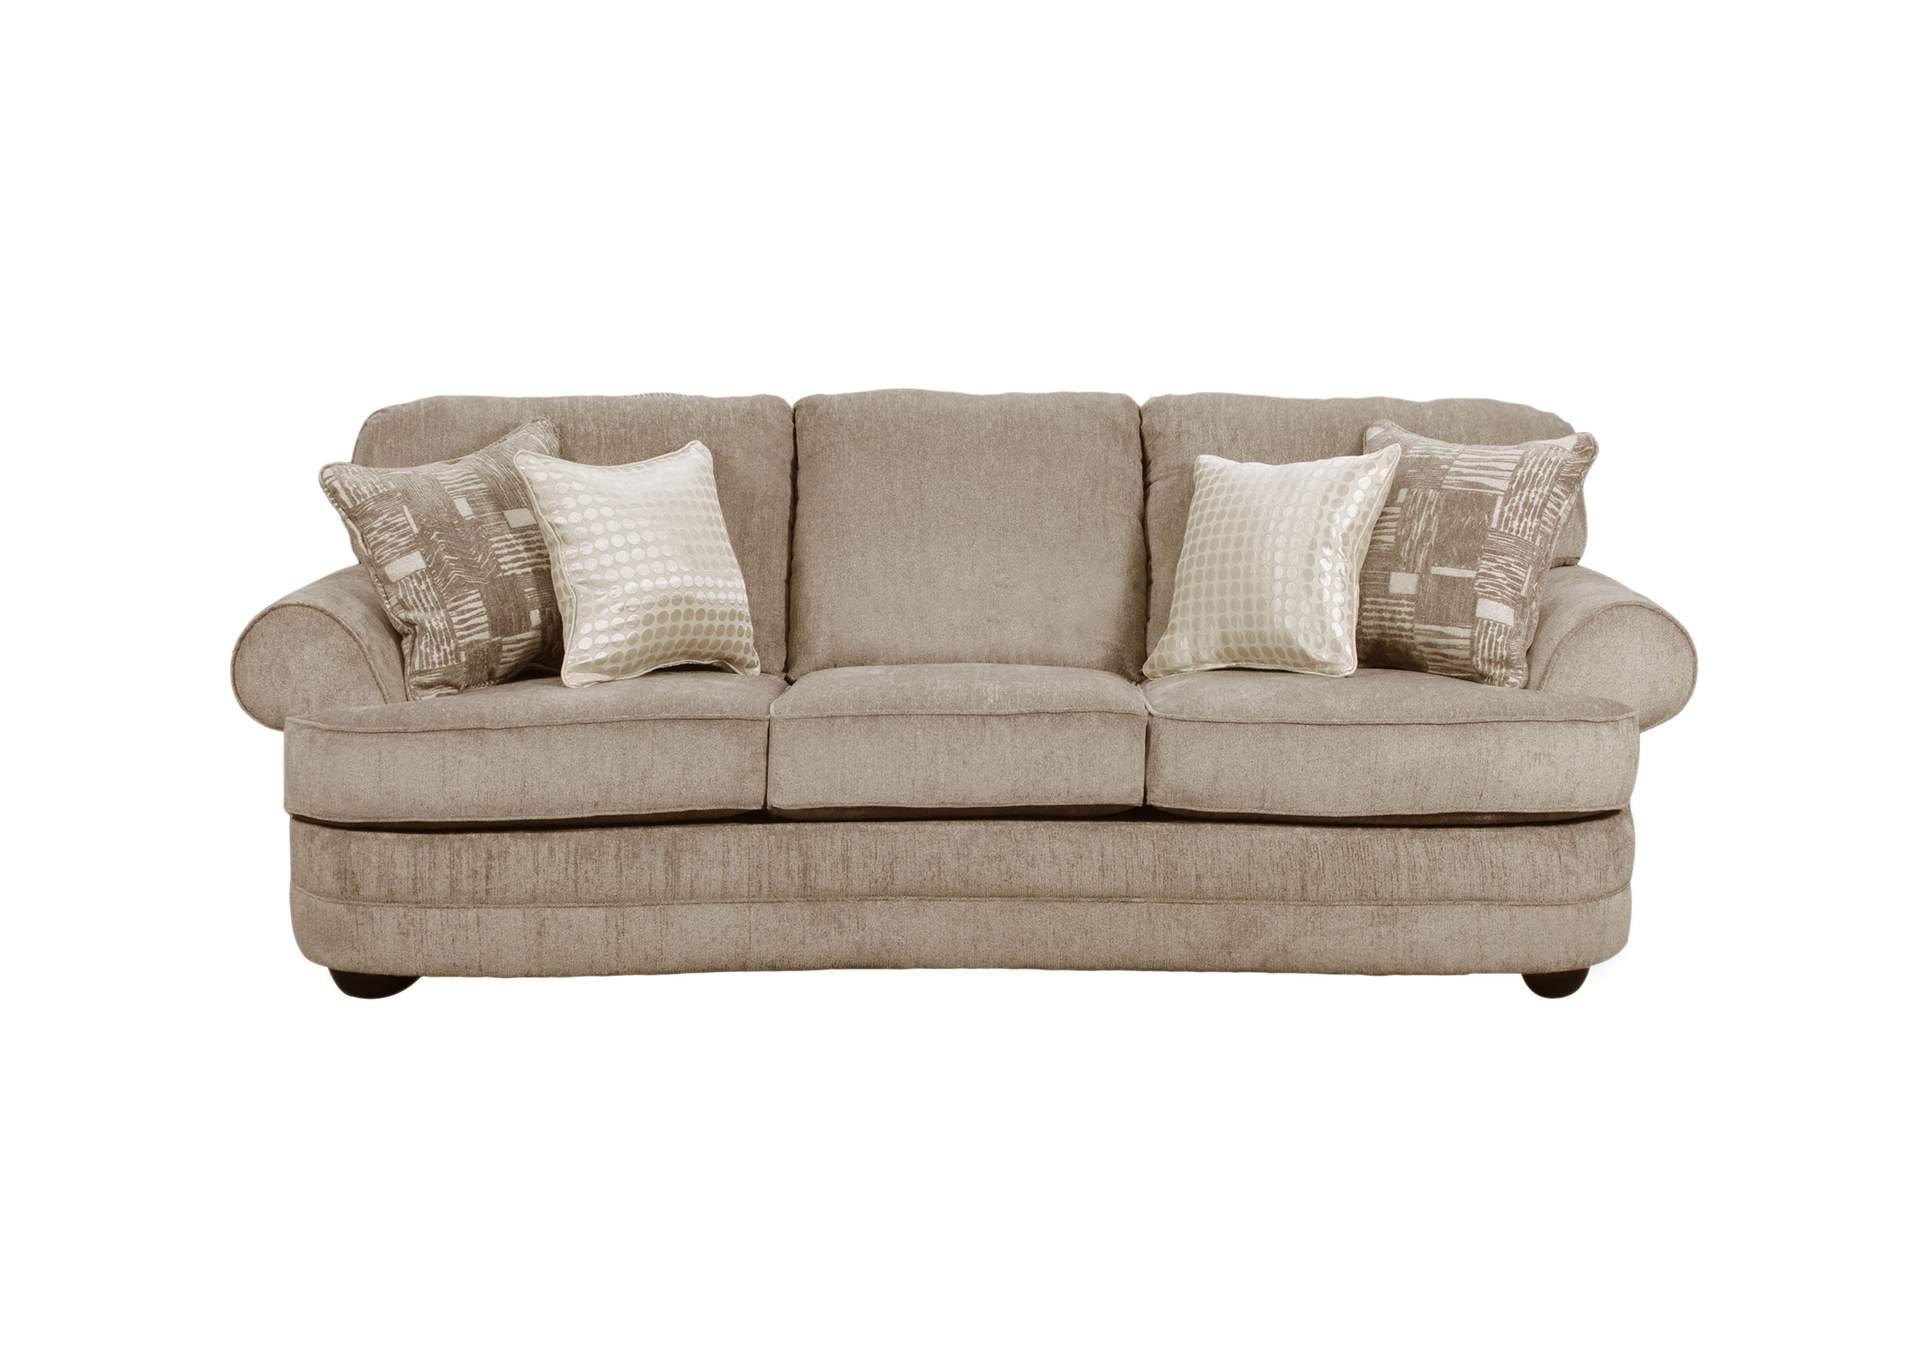 Gray Oversized Sofa with Accent Pillows